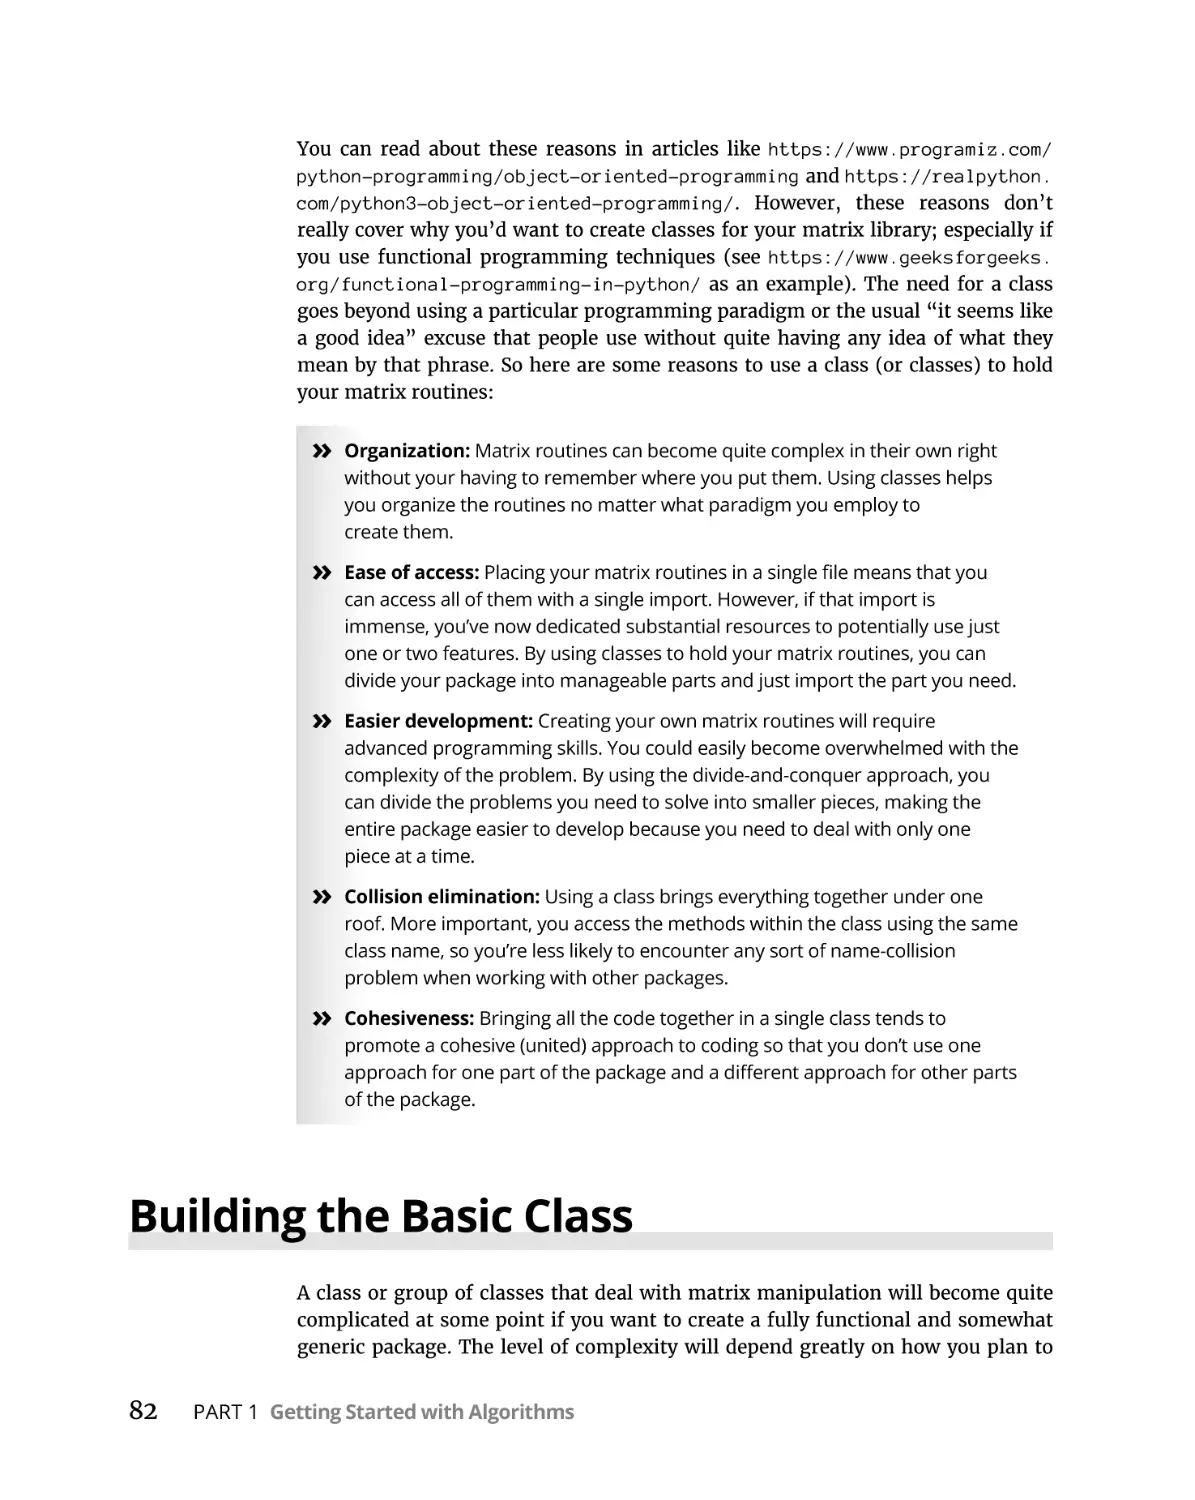 Building the Basic Class